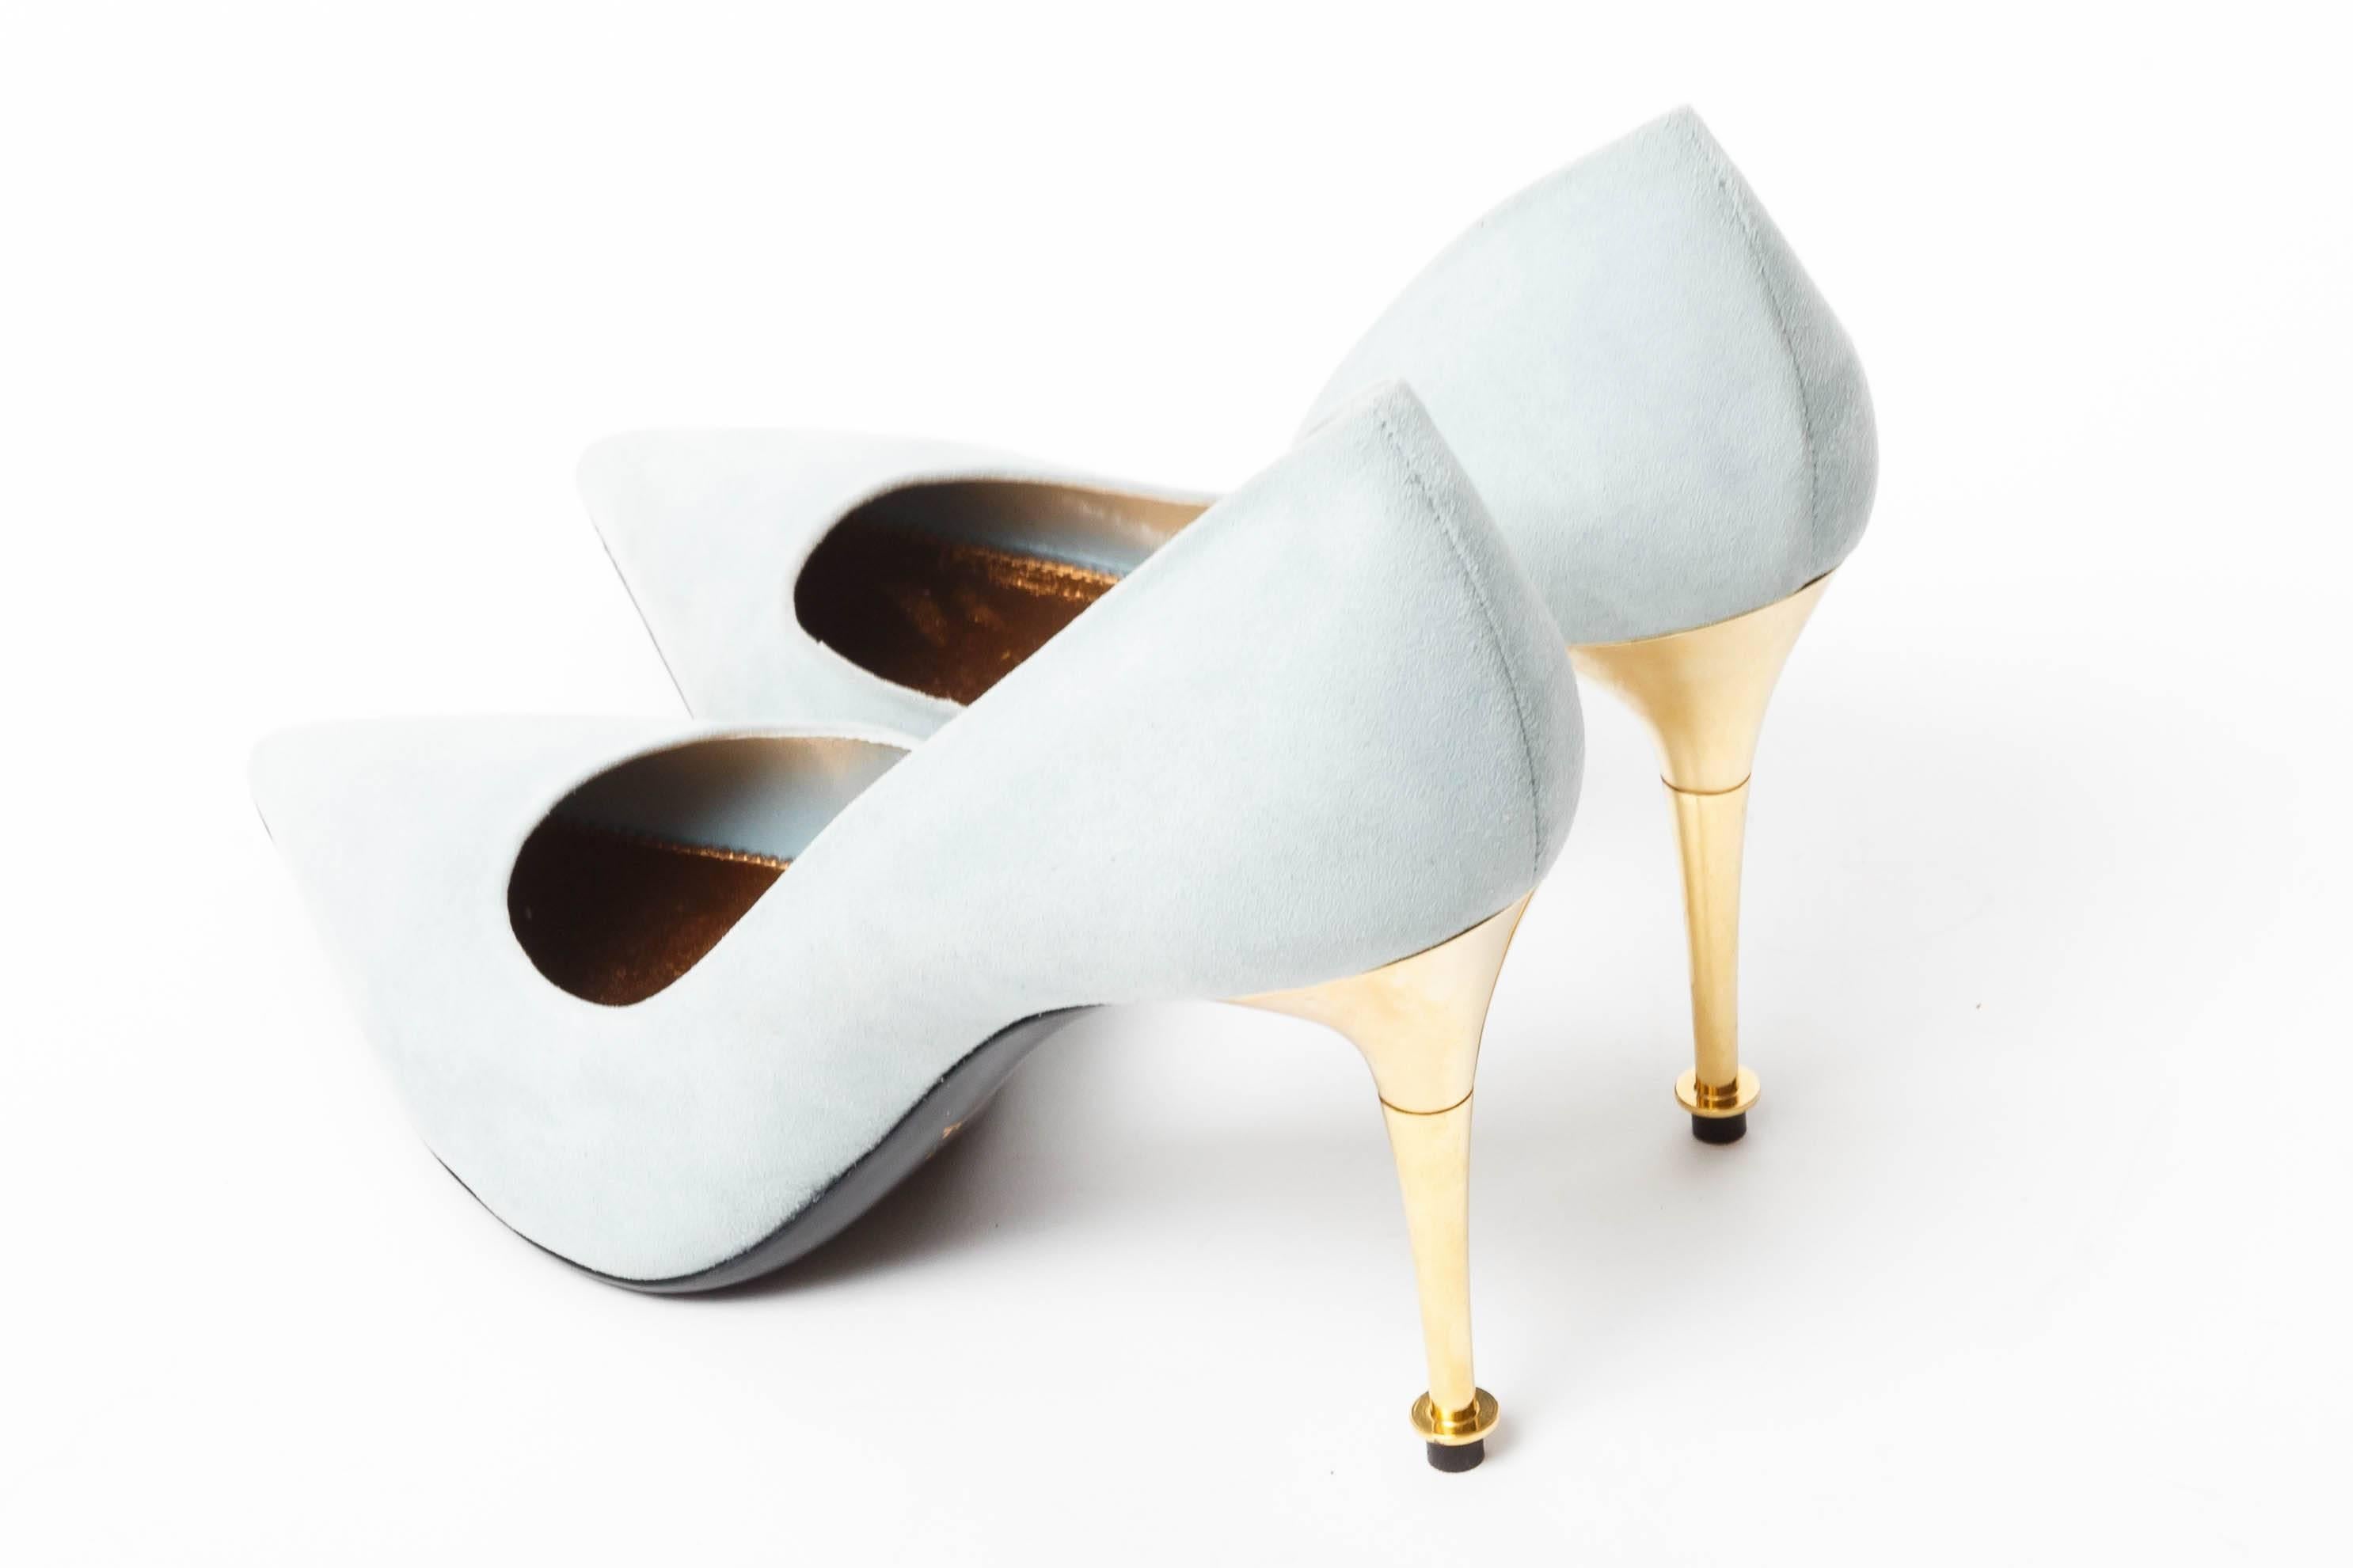 Gray Tom Ford Powder Blue Suede Pumps With Spike Heel - New With Box - 38.5 / 8.5